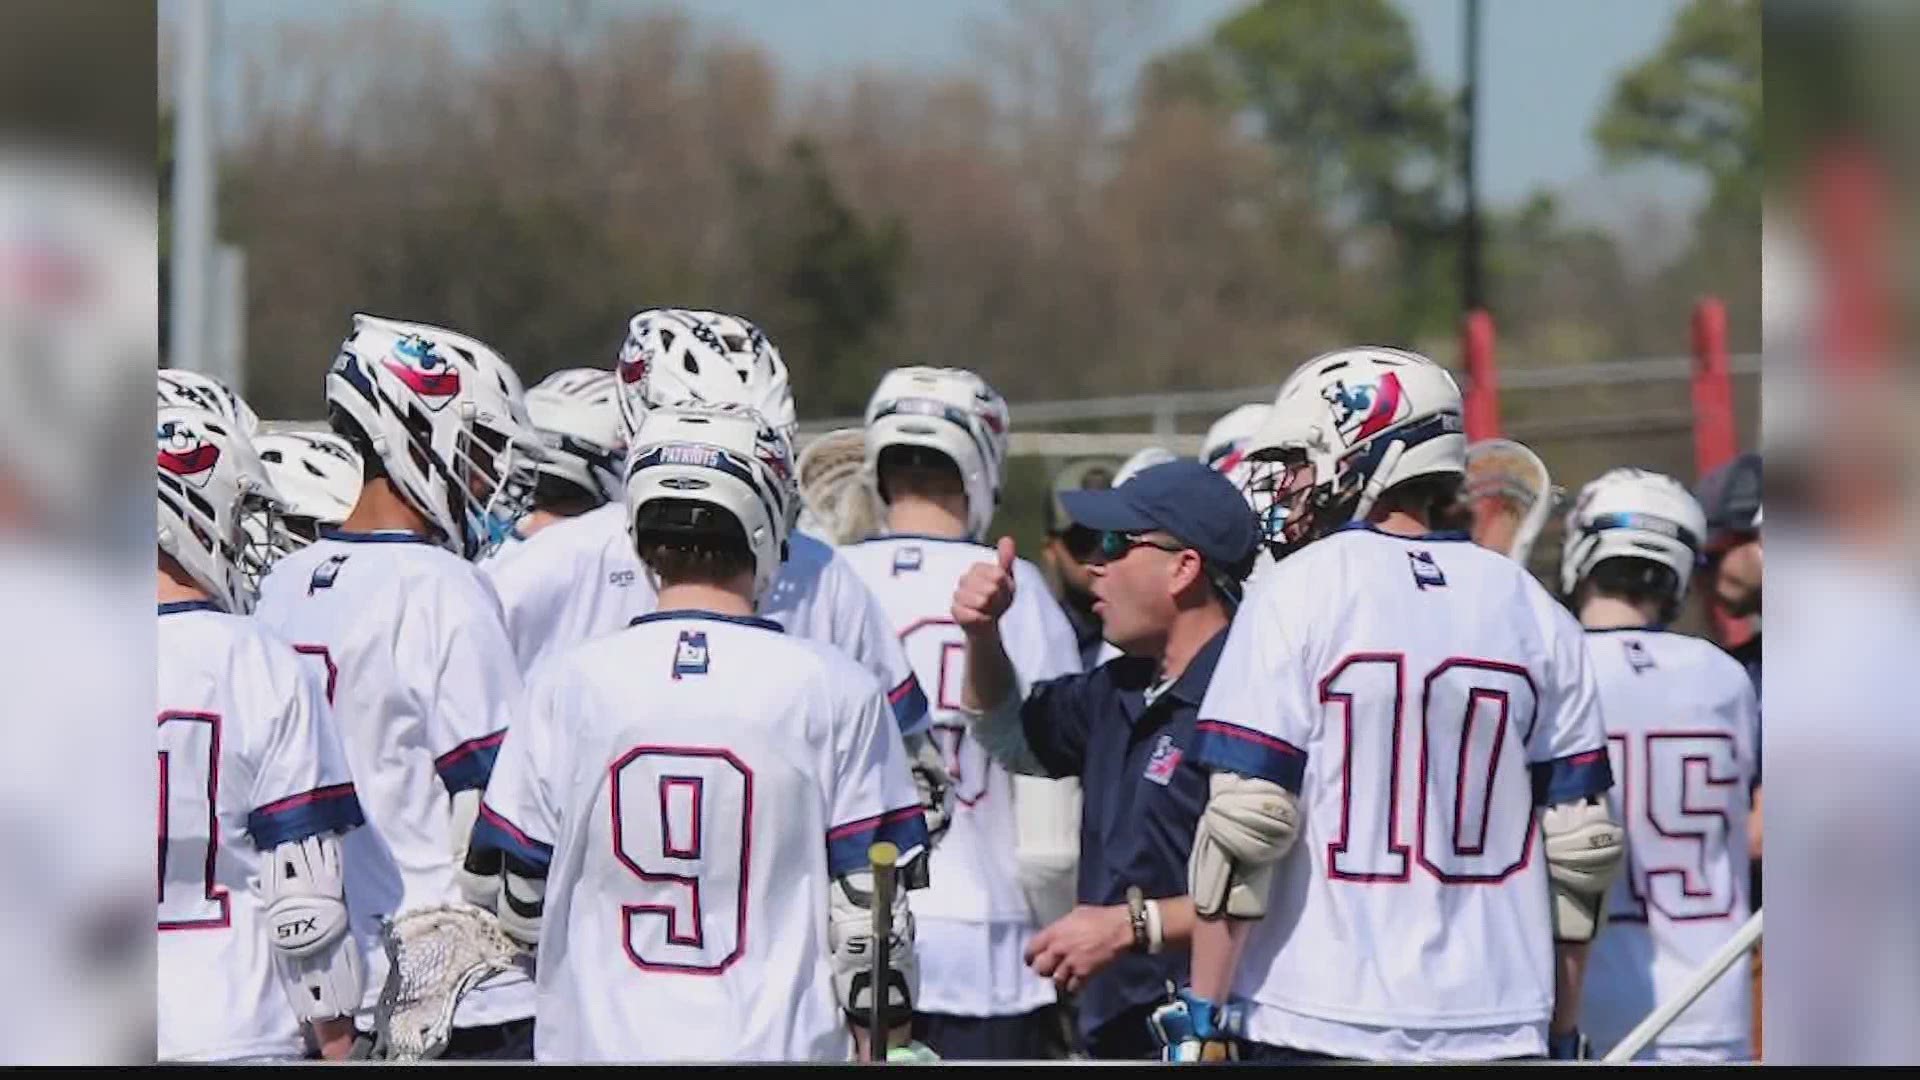 Bob Jones lacrosse is using this time to do team bonding under social distancing guidelines.